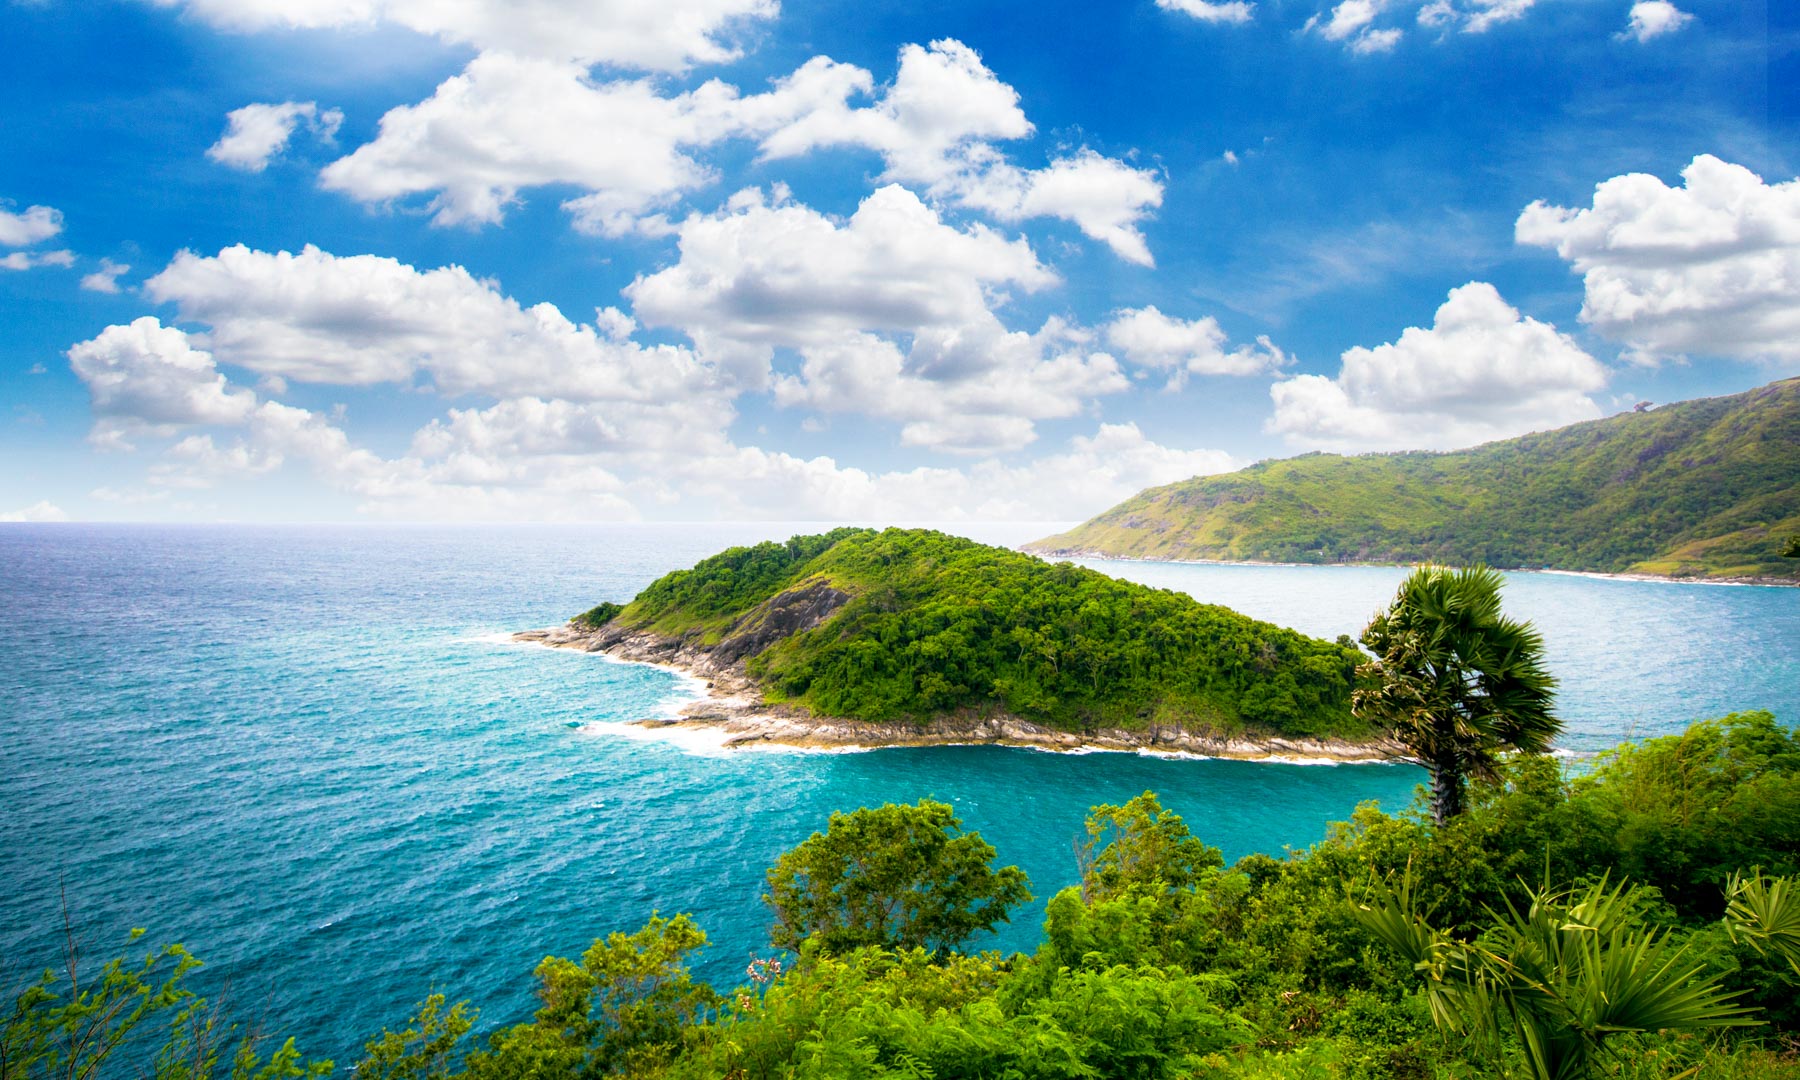 12 of the Best Running Routes in Phuket